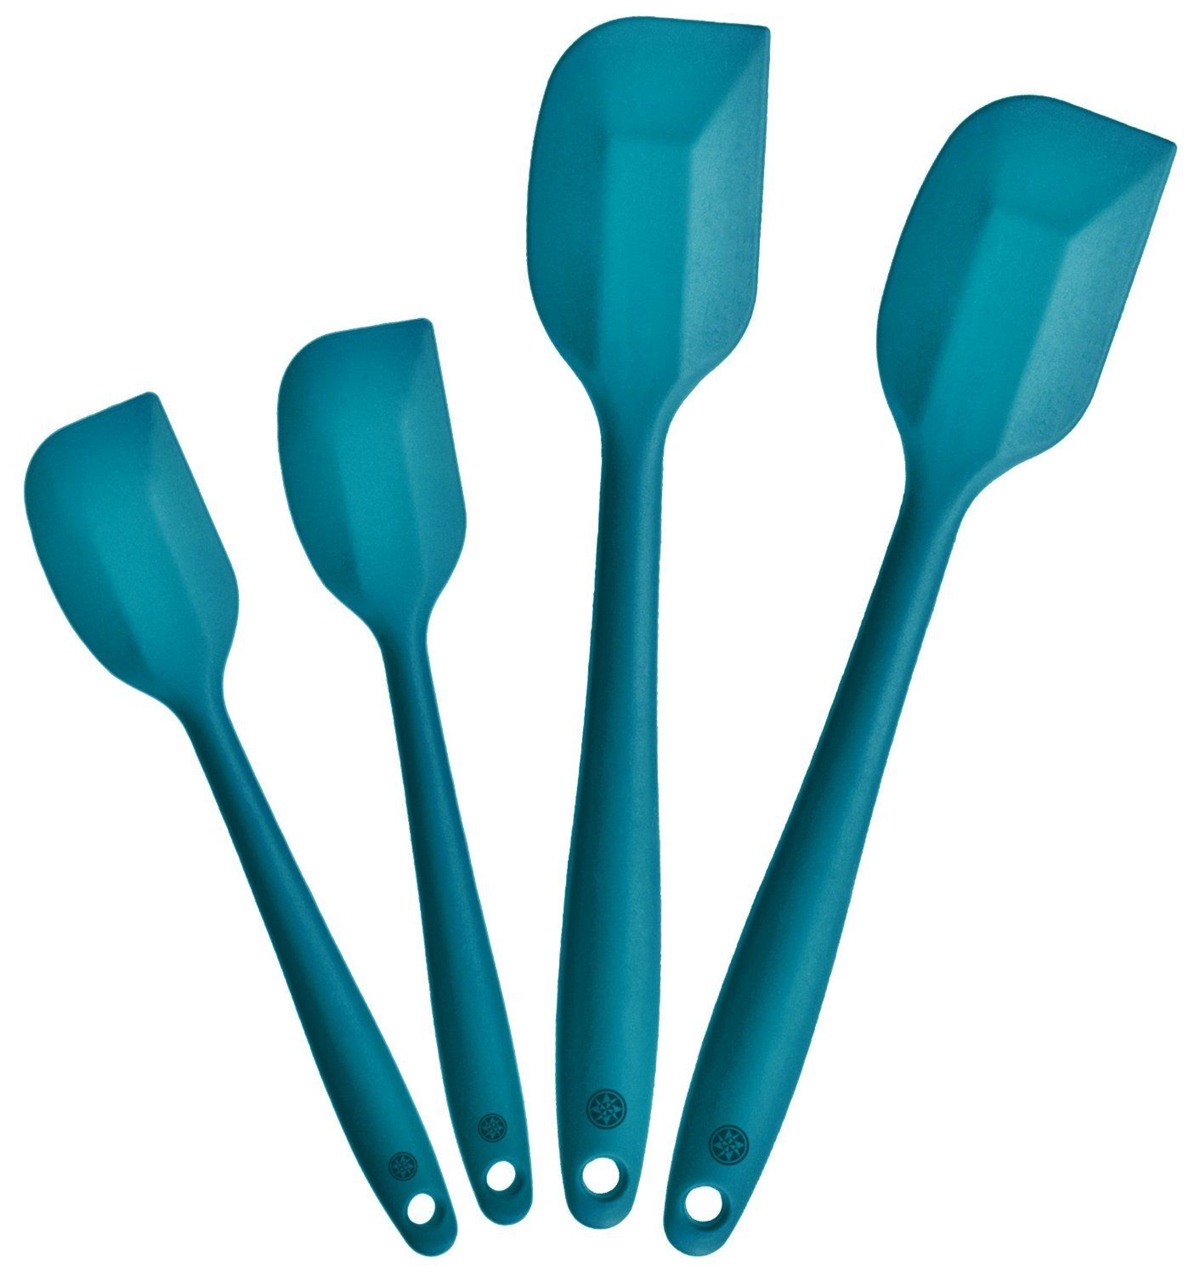 9 Incredible Starpack Spatula for 2023